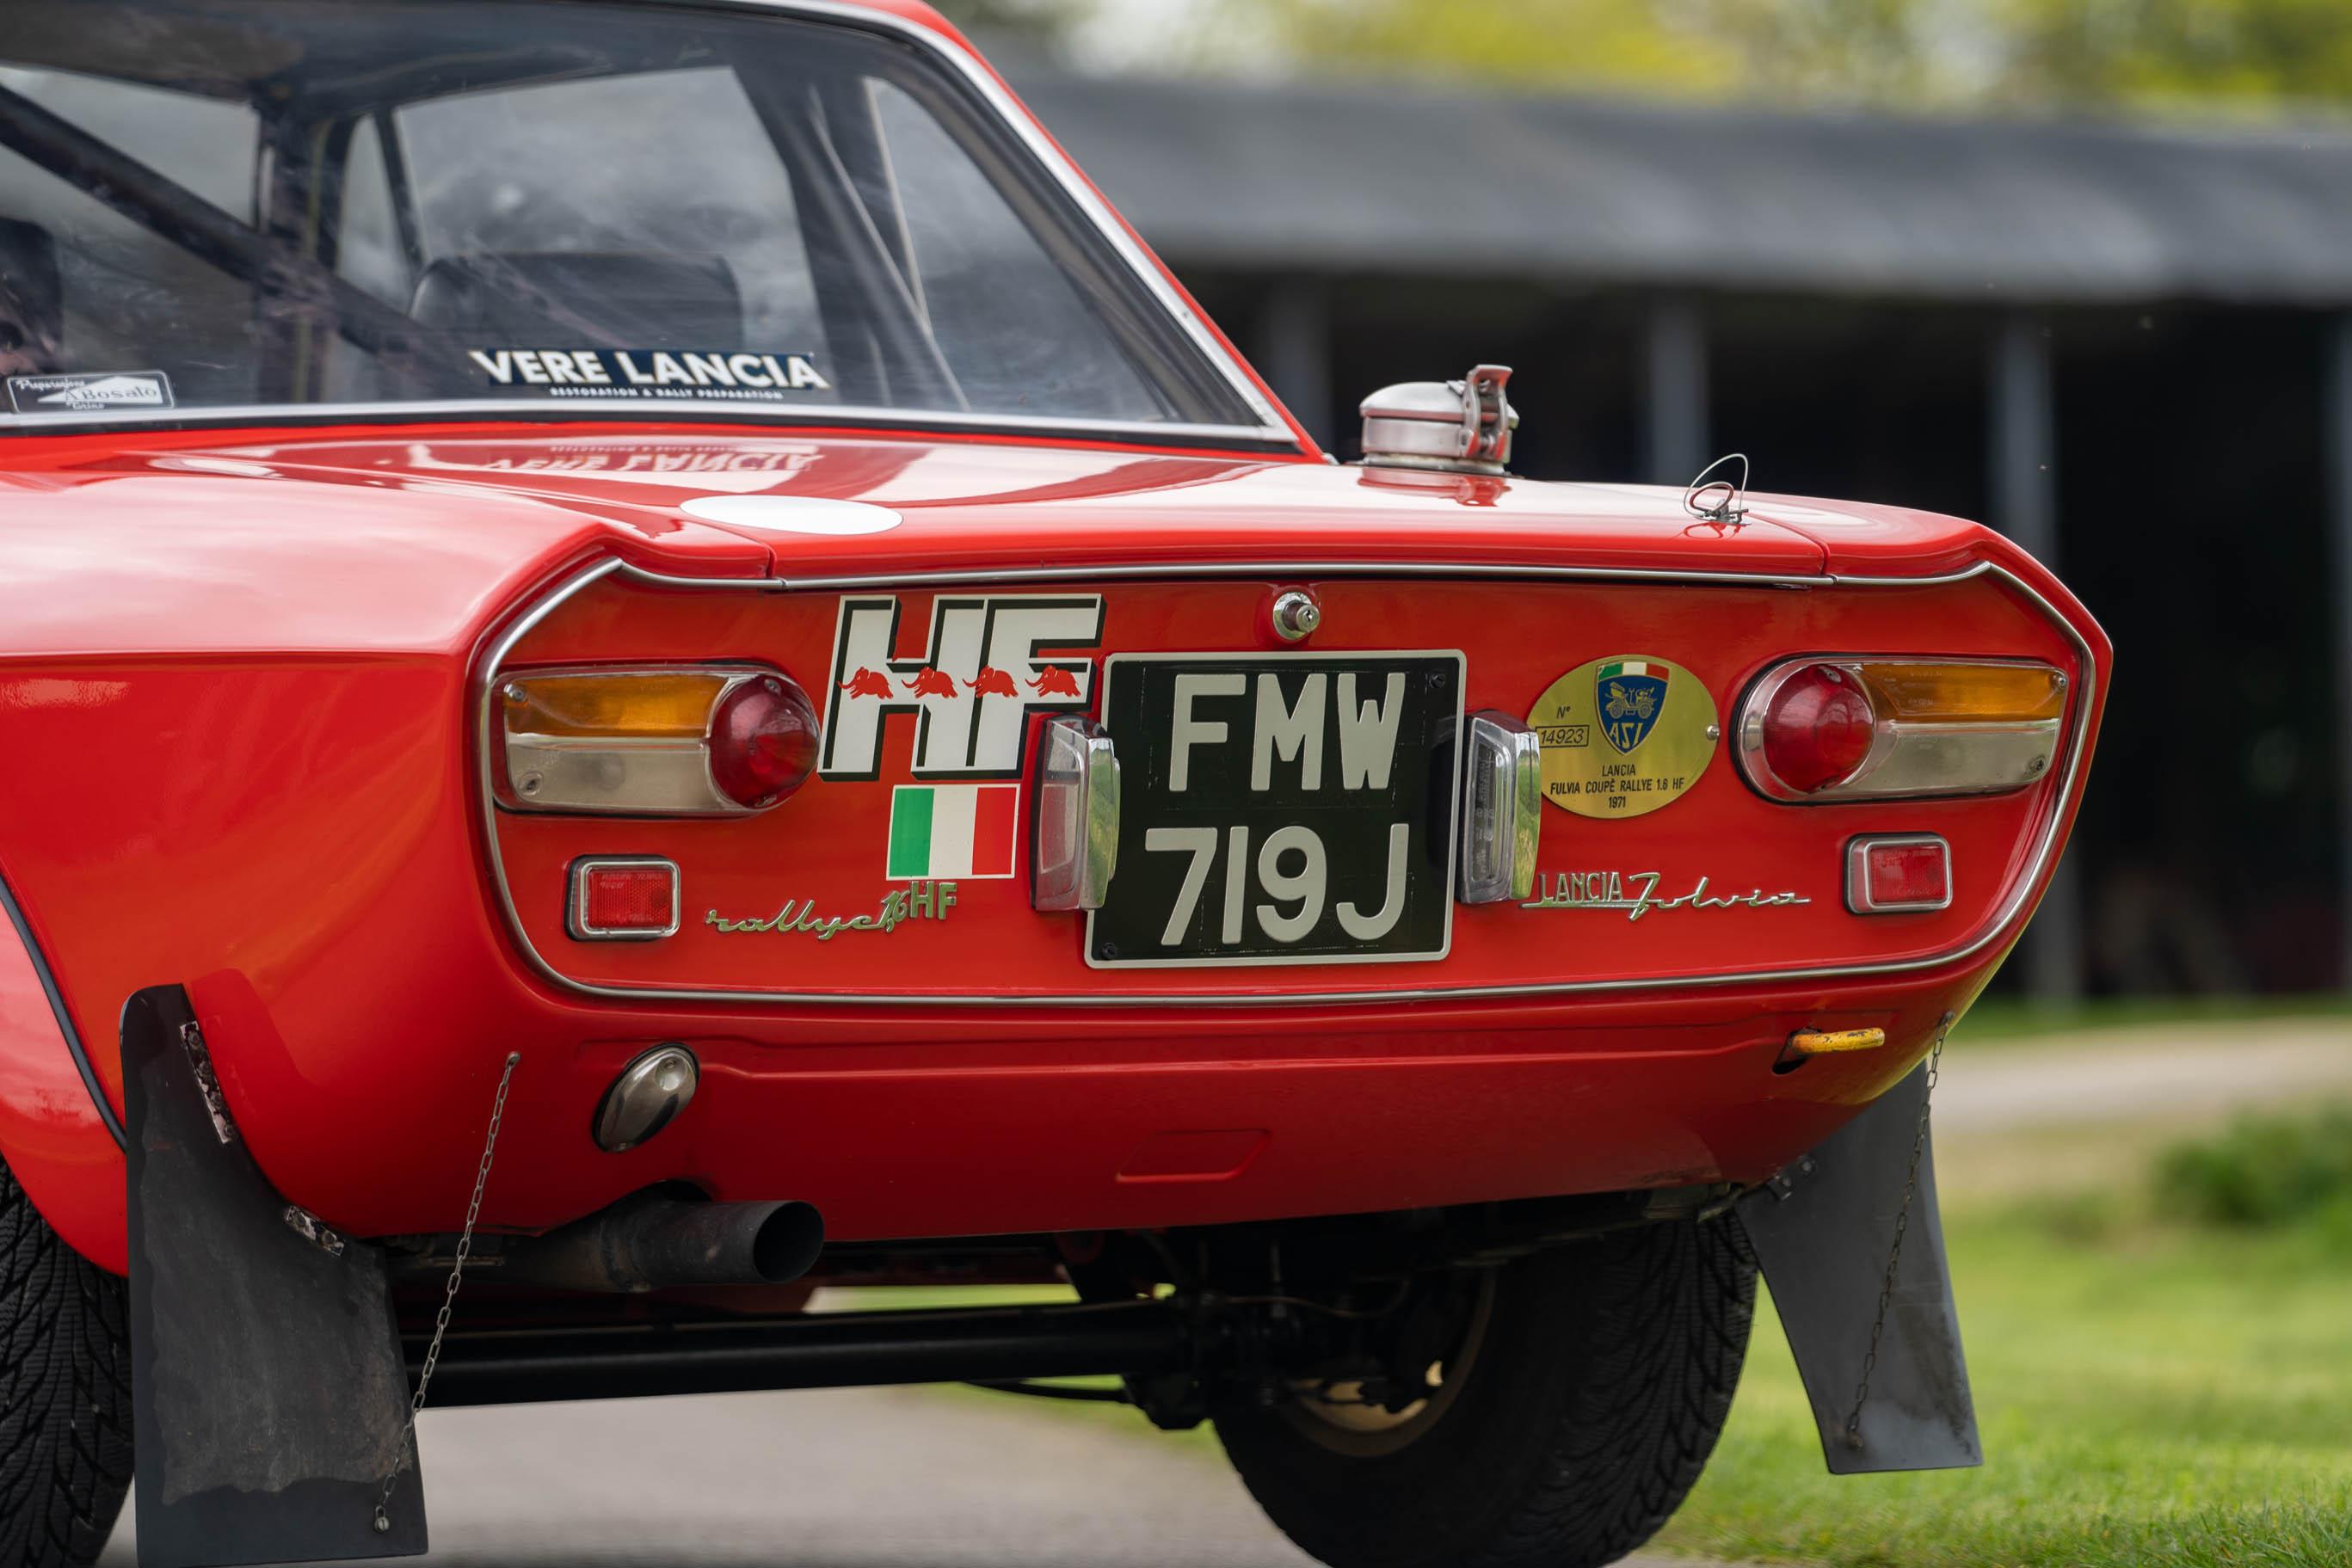 Lancia Fulvia 1.6 HF Competition Works Car (FIA Papers) 1971